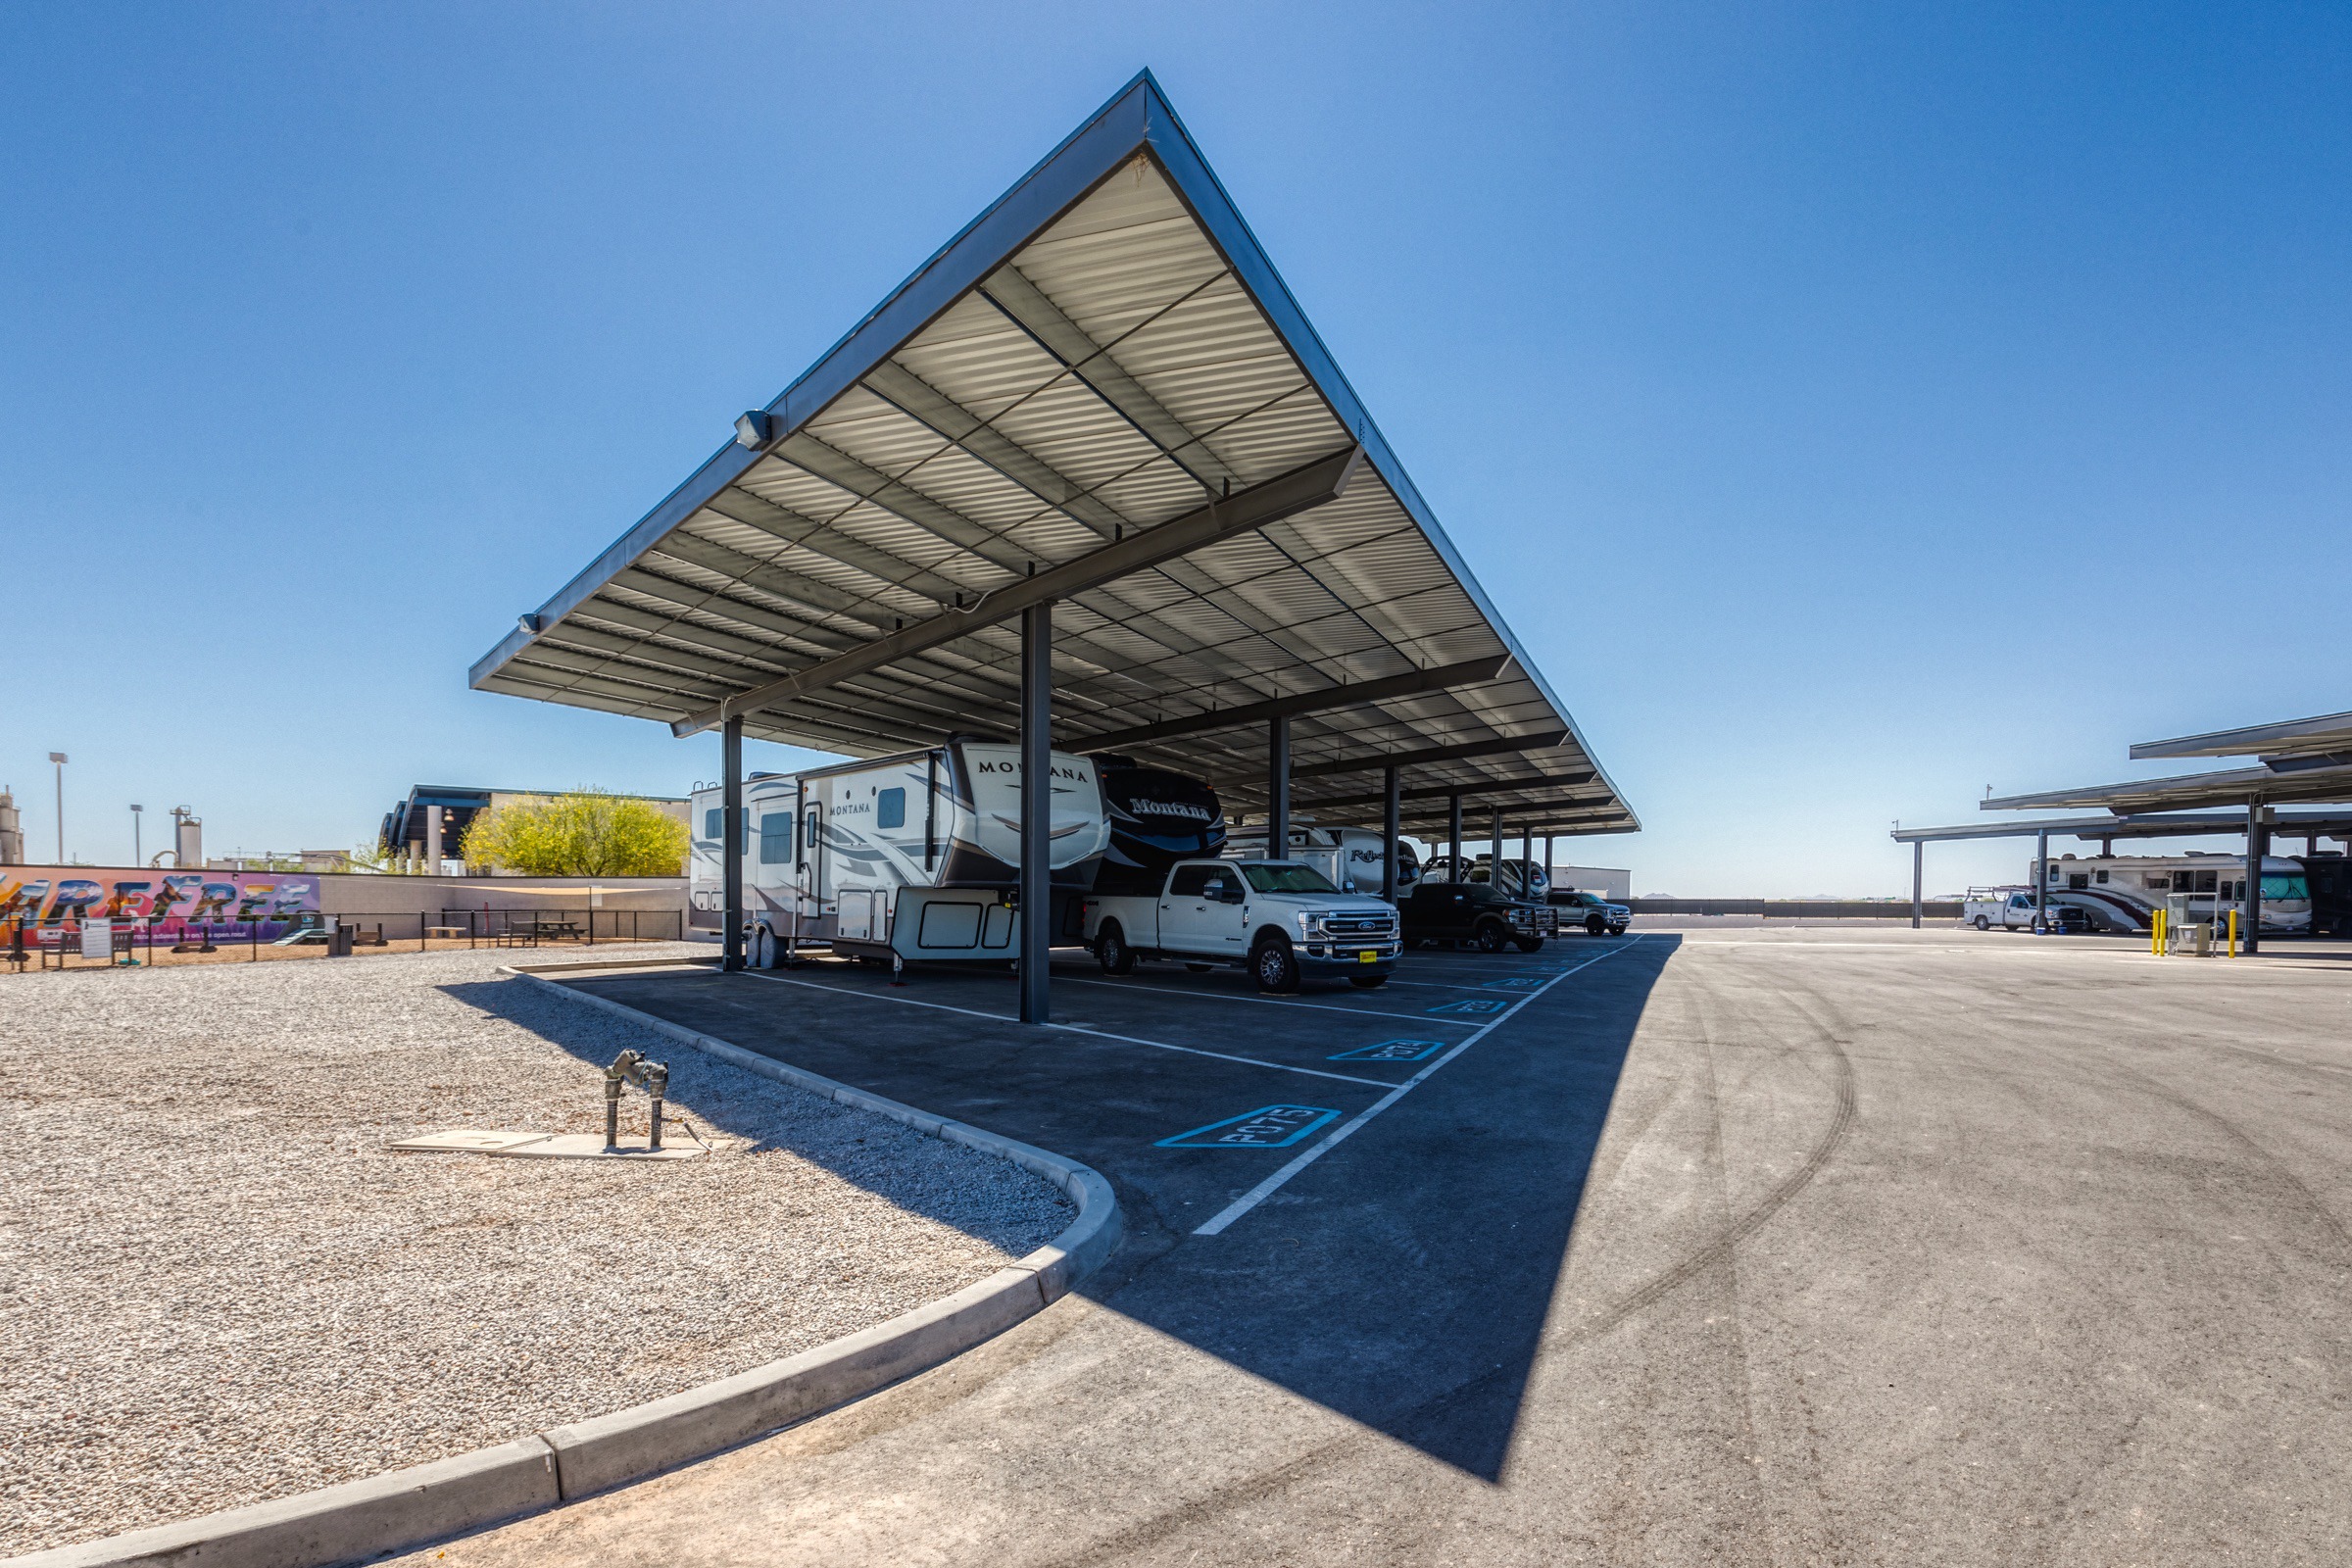 New canopies to protect your RV from the sun